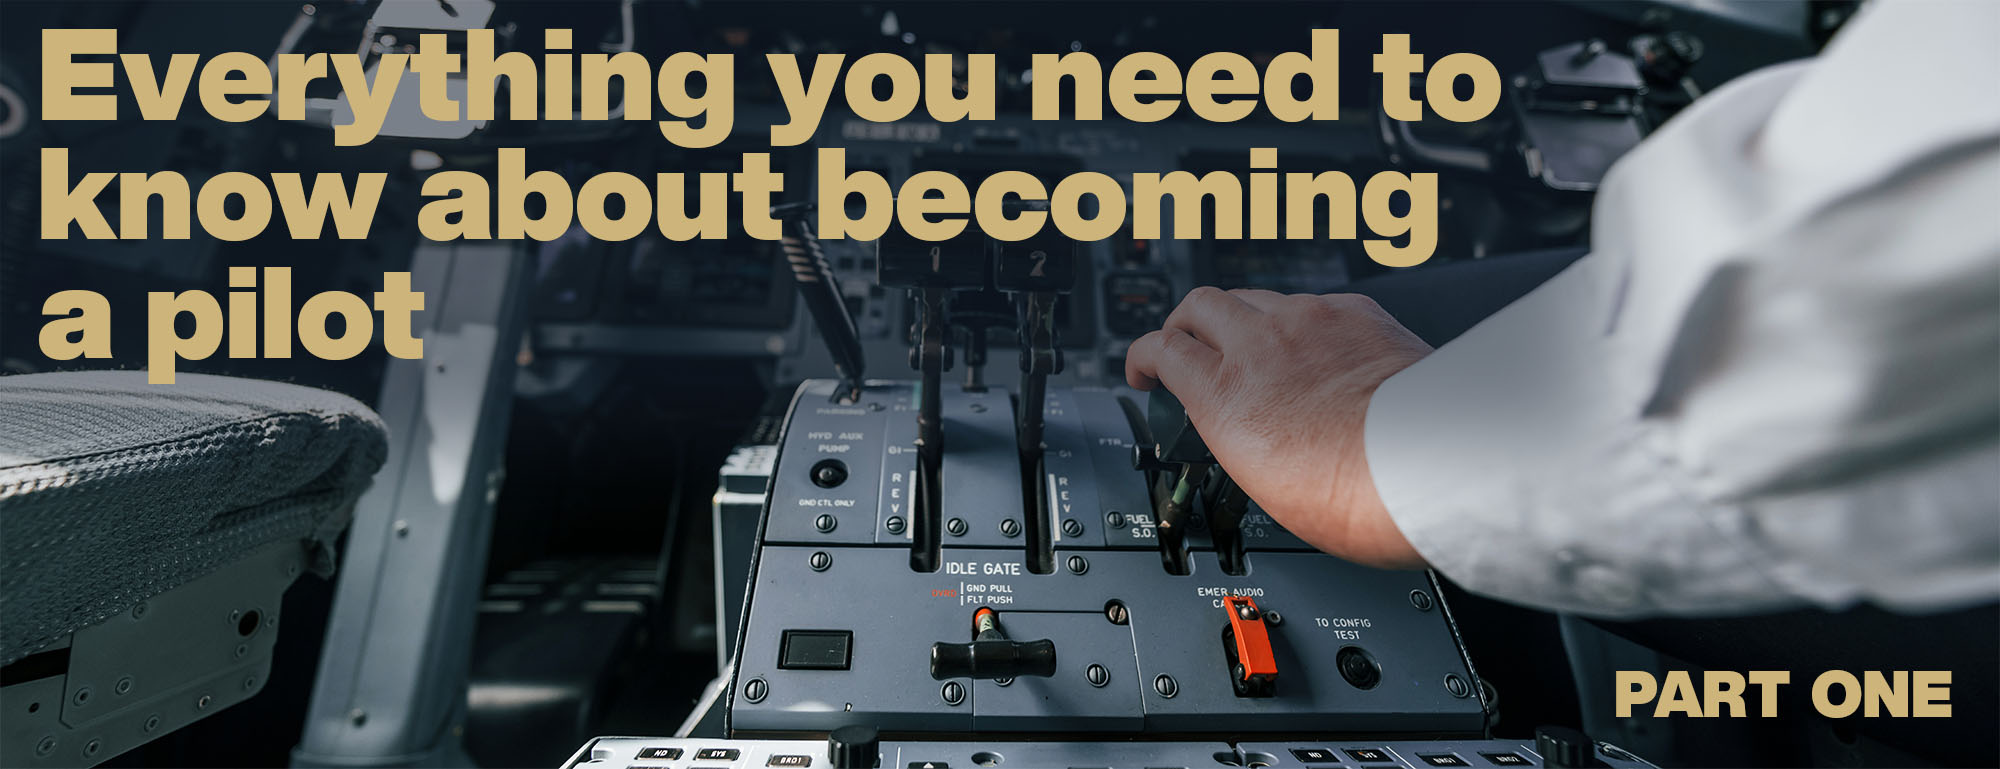 everything you need to know about how to become a pilot